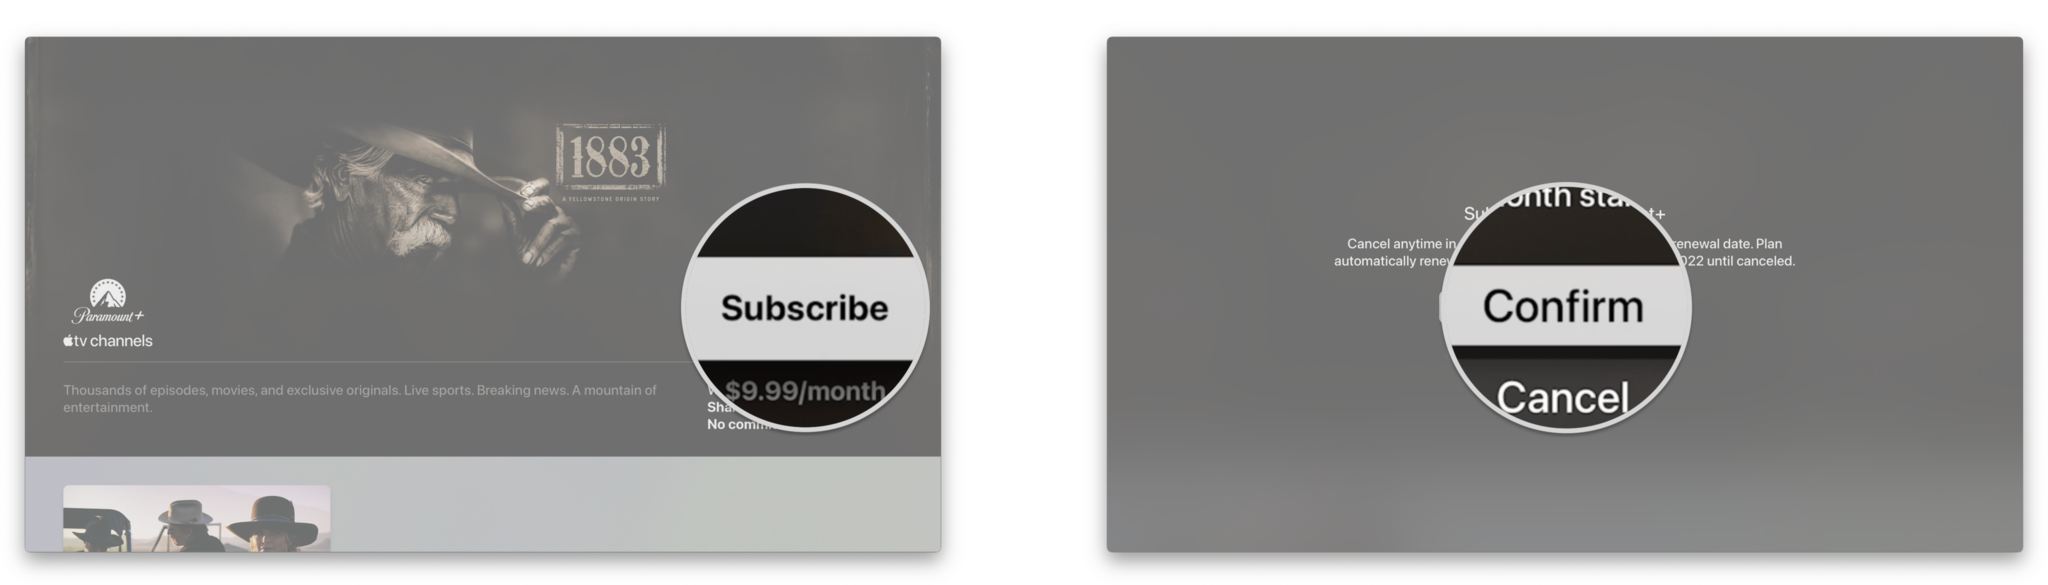 How to subscribe to Channels in the Apple TV app on Apple TV by showing steps: Click Subscribe or Try It Free, Click Confirm